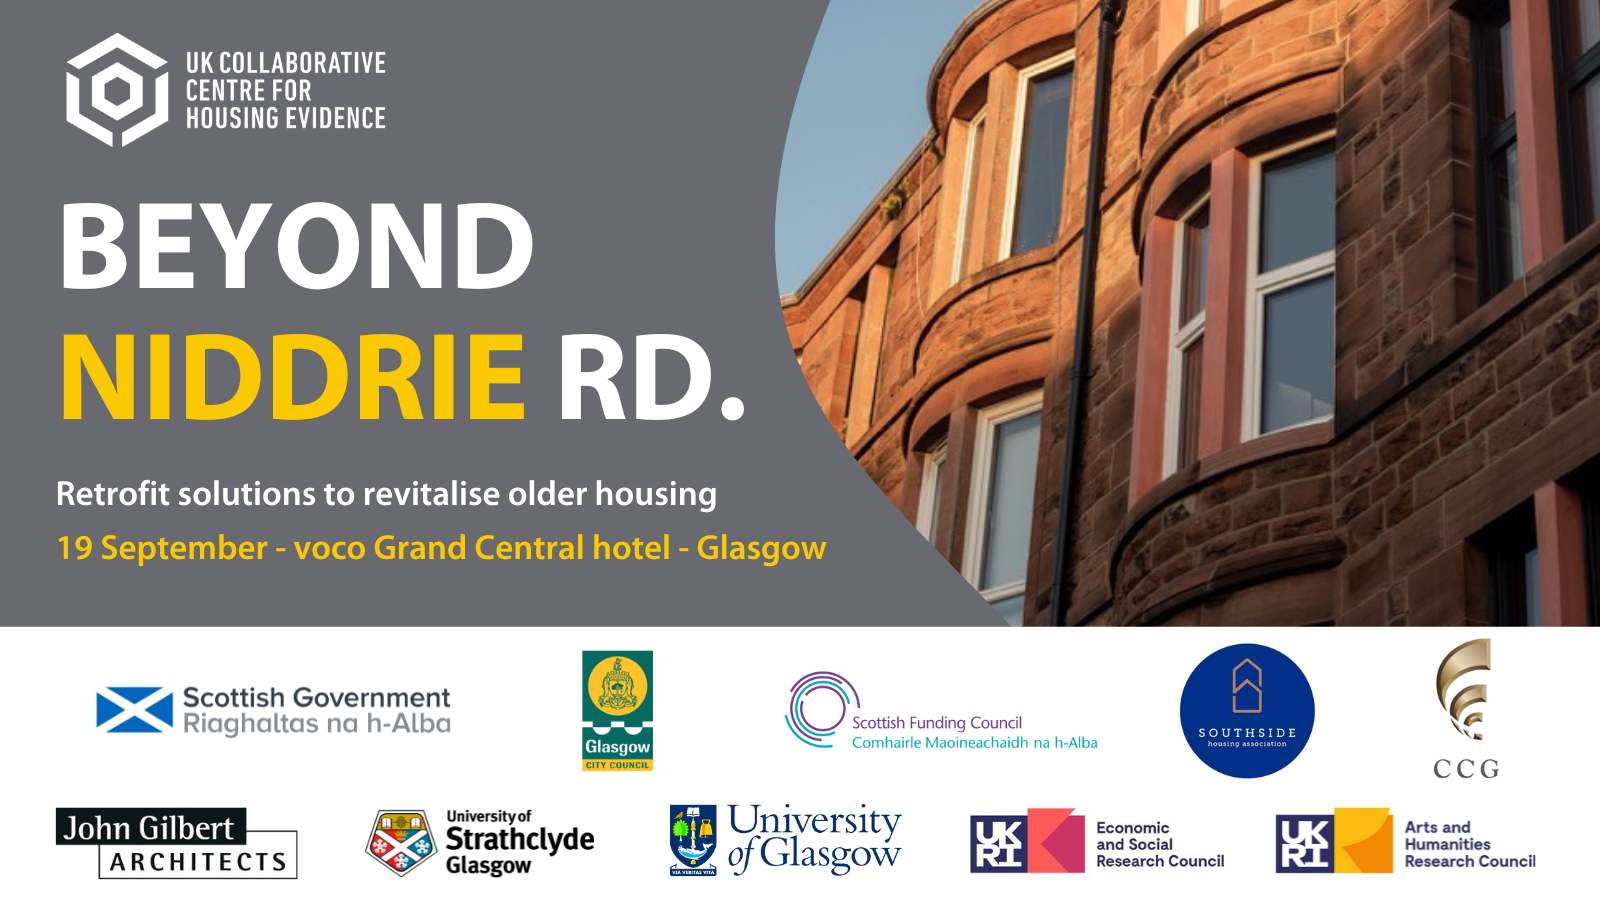 Conference seeks solutions to improve housing stock in Glasgow and beyond